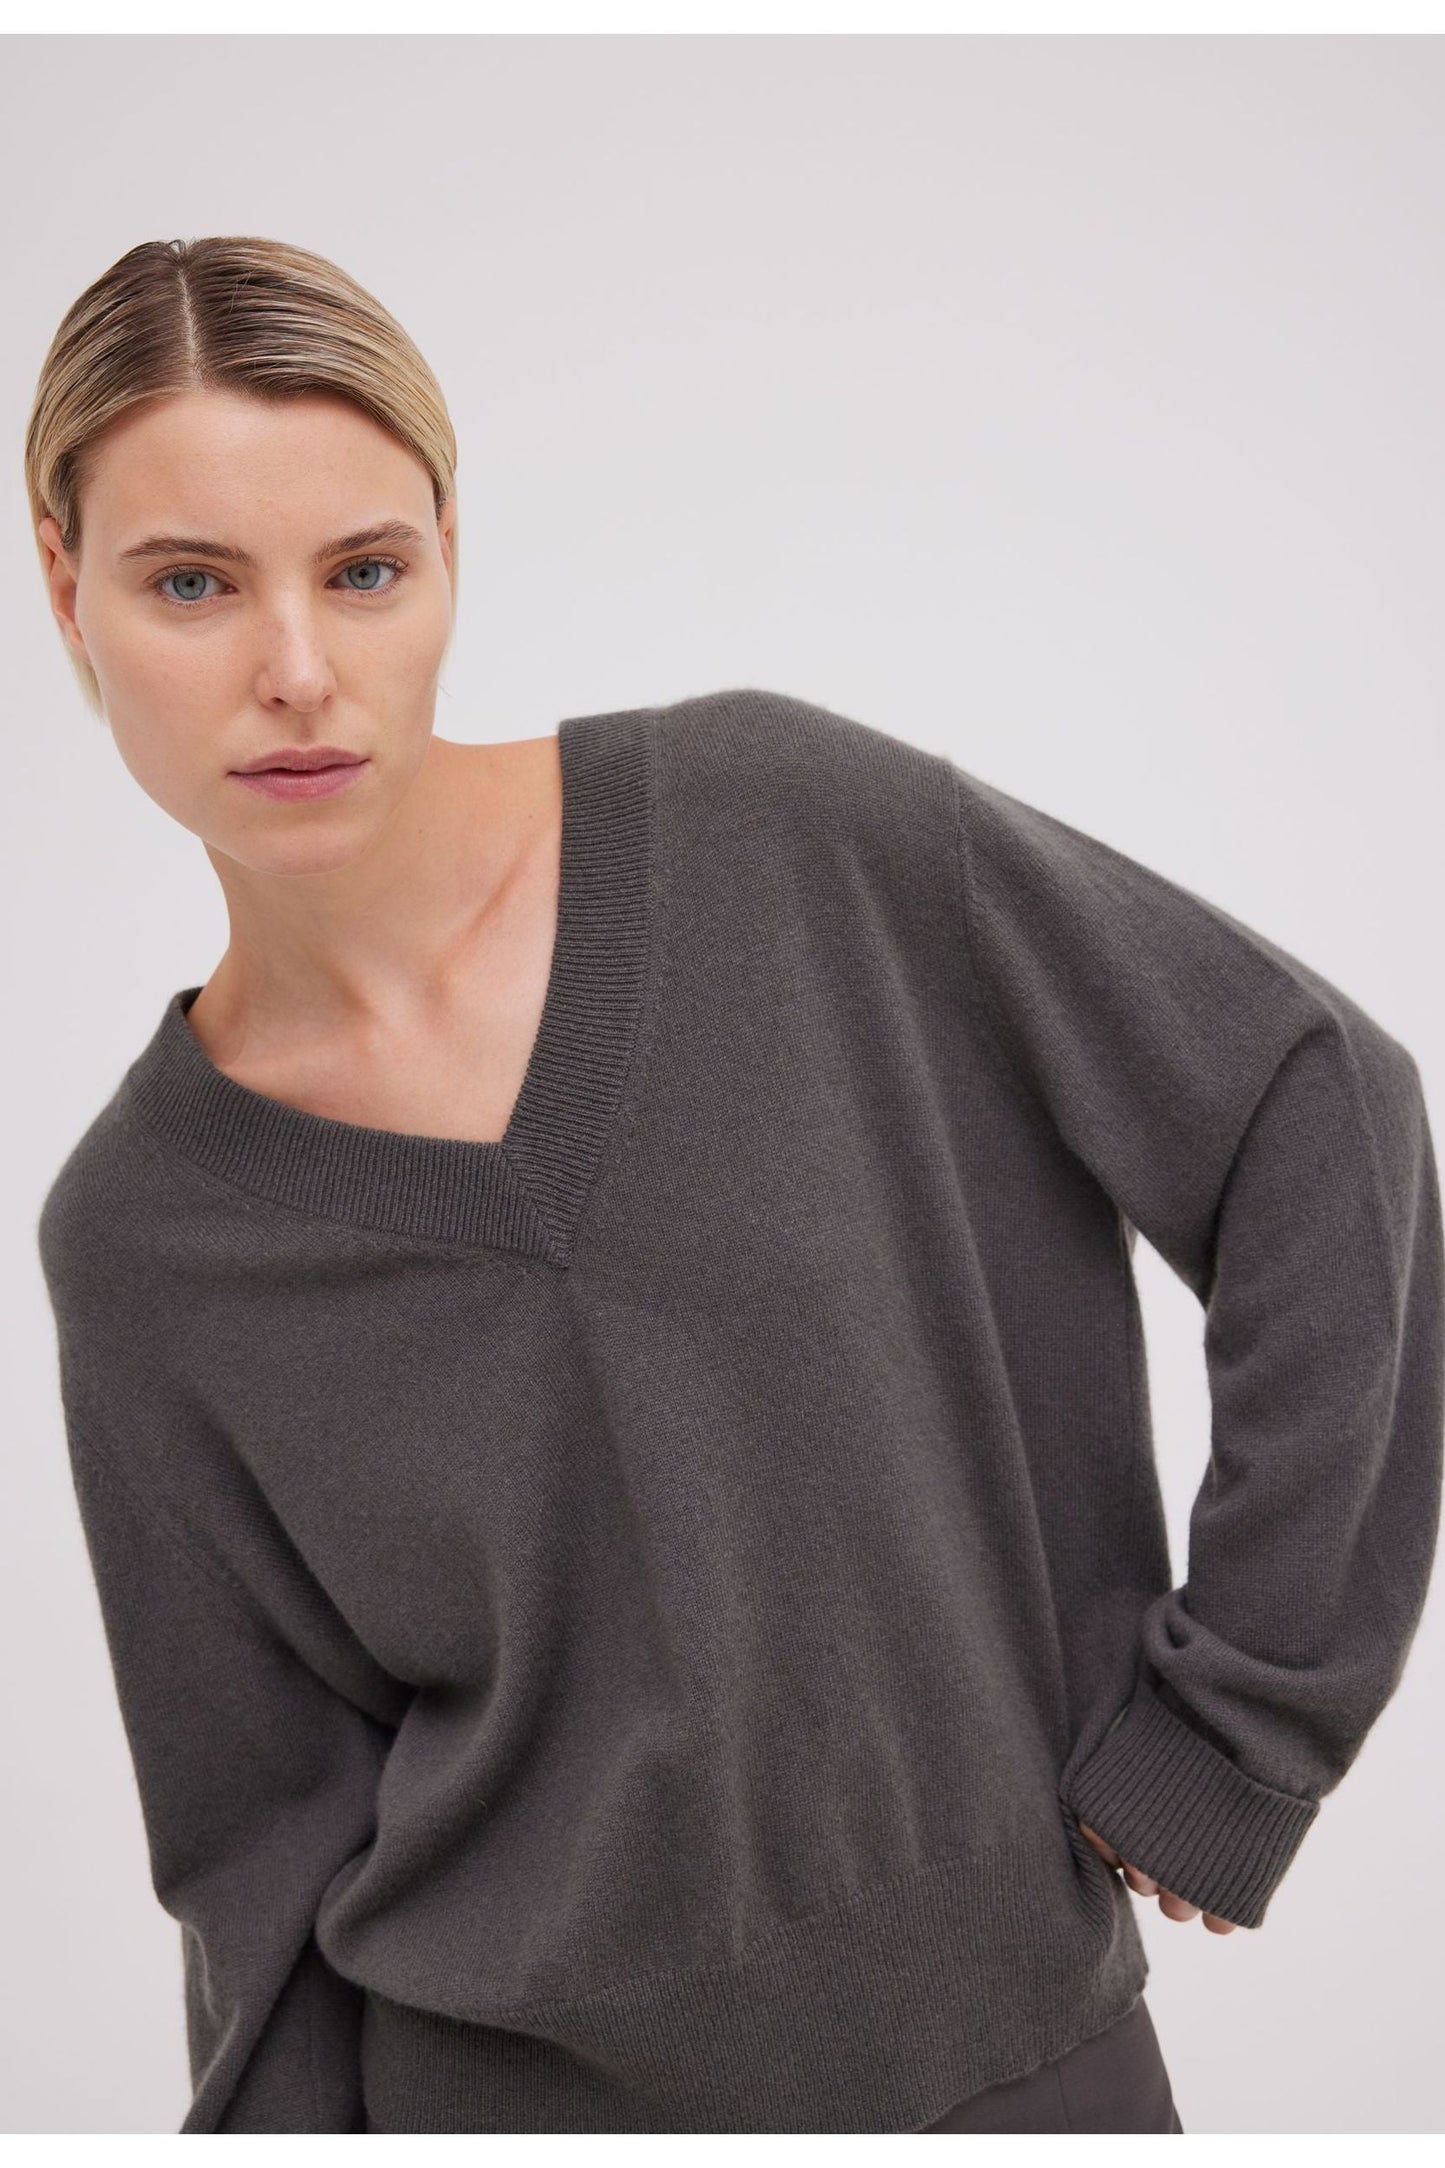 Sharpo Sweater in Sargent by Jac + Jack